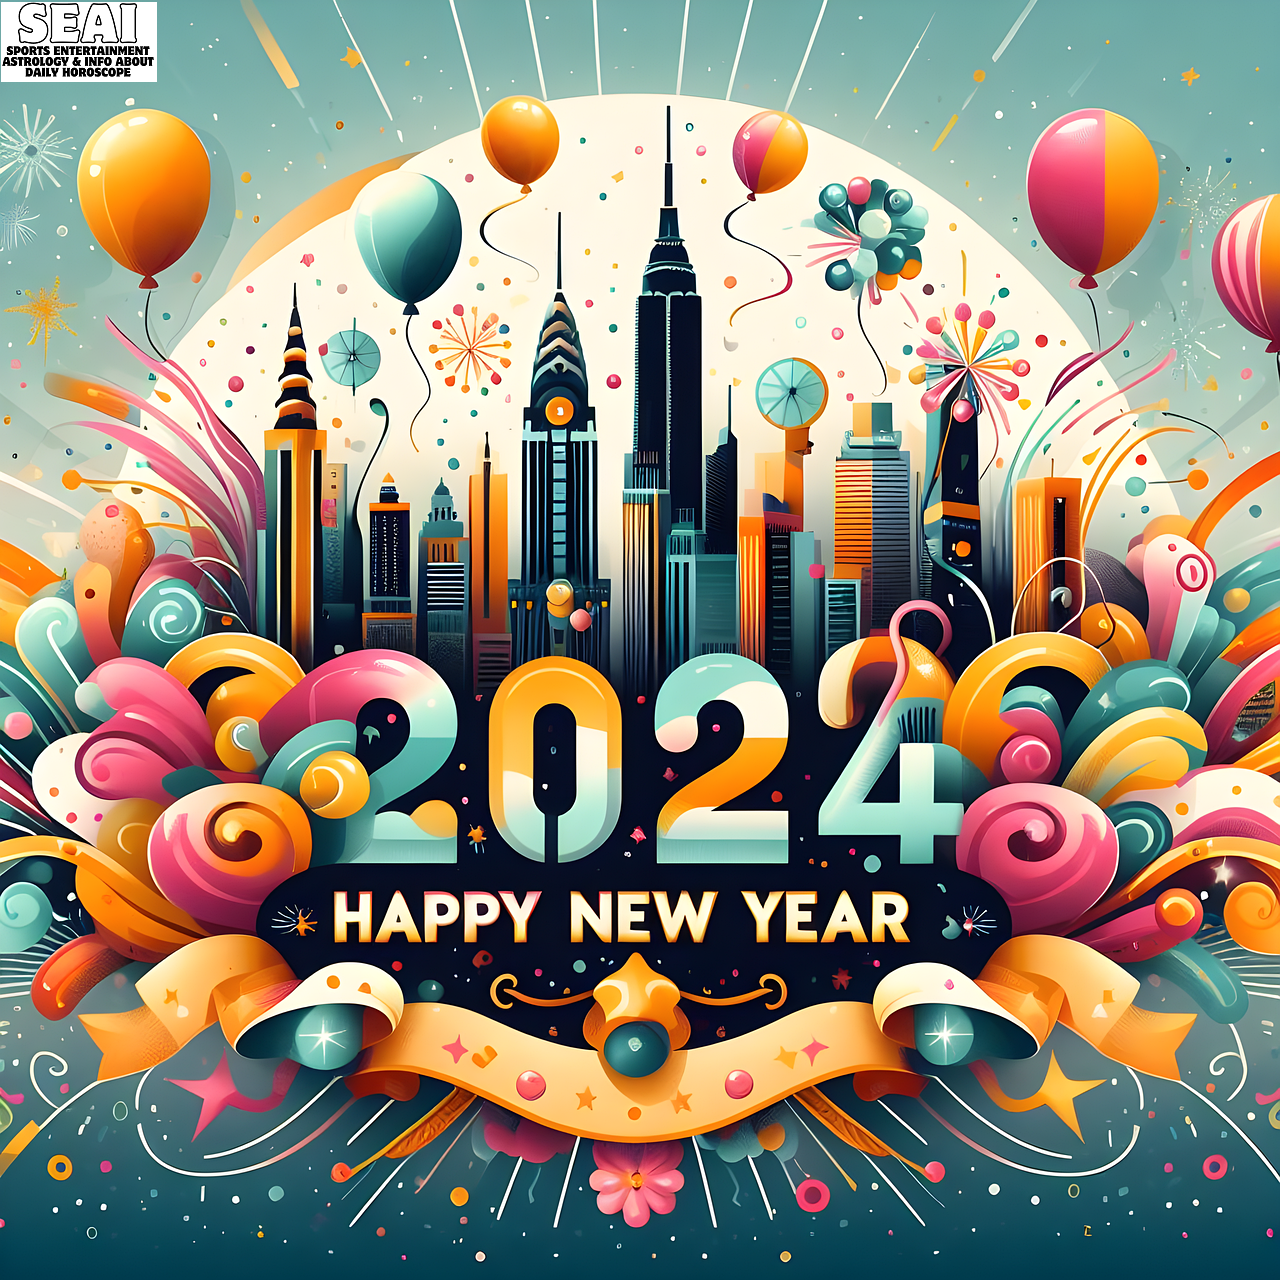 Happy New Year wishes wallpapers images 2024 download